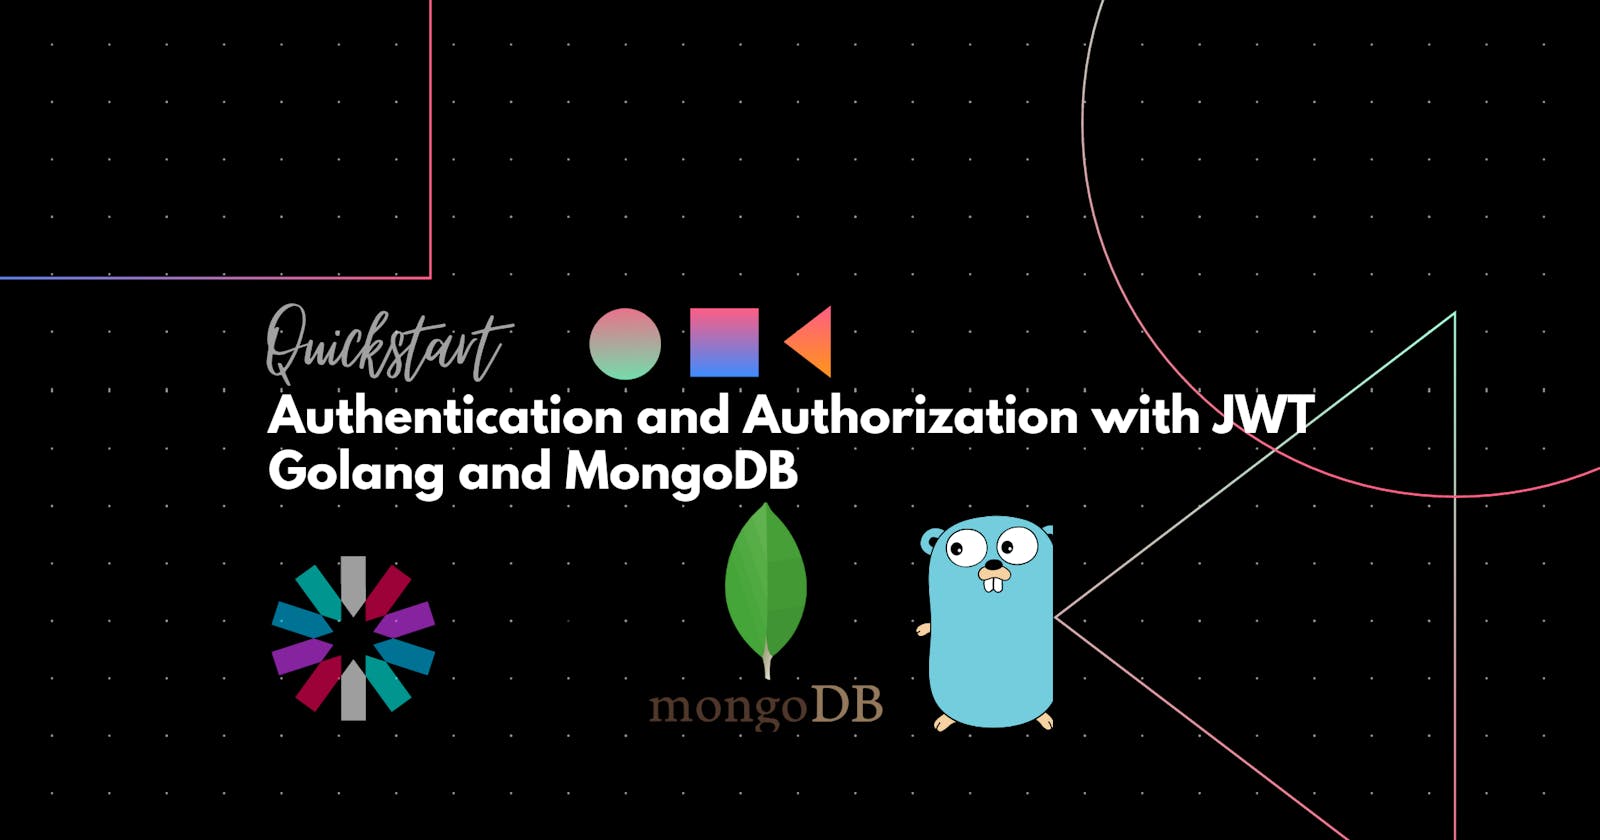 Quickstart on Authentication and Authorization with JWT, Golang and MongoDB